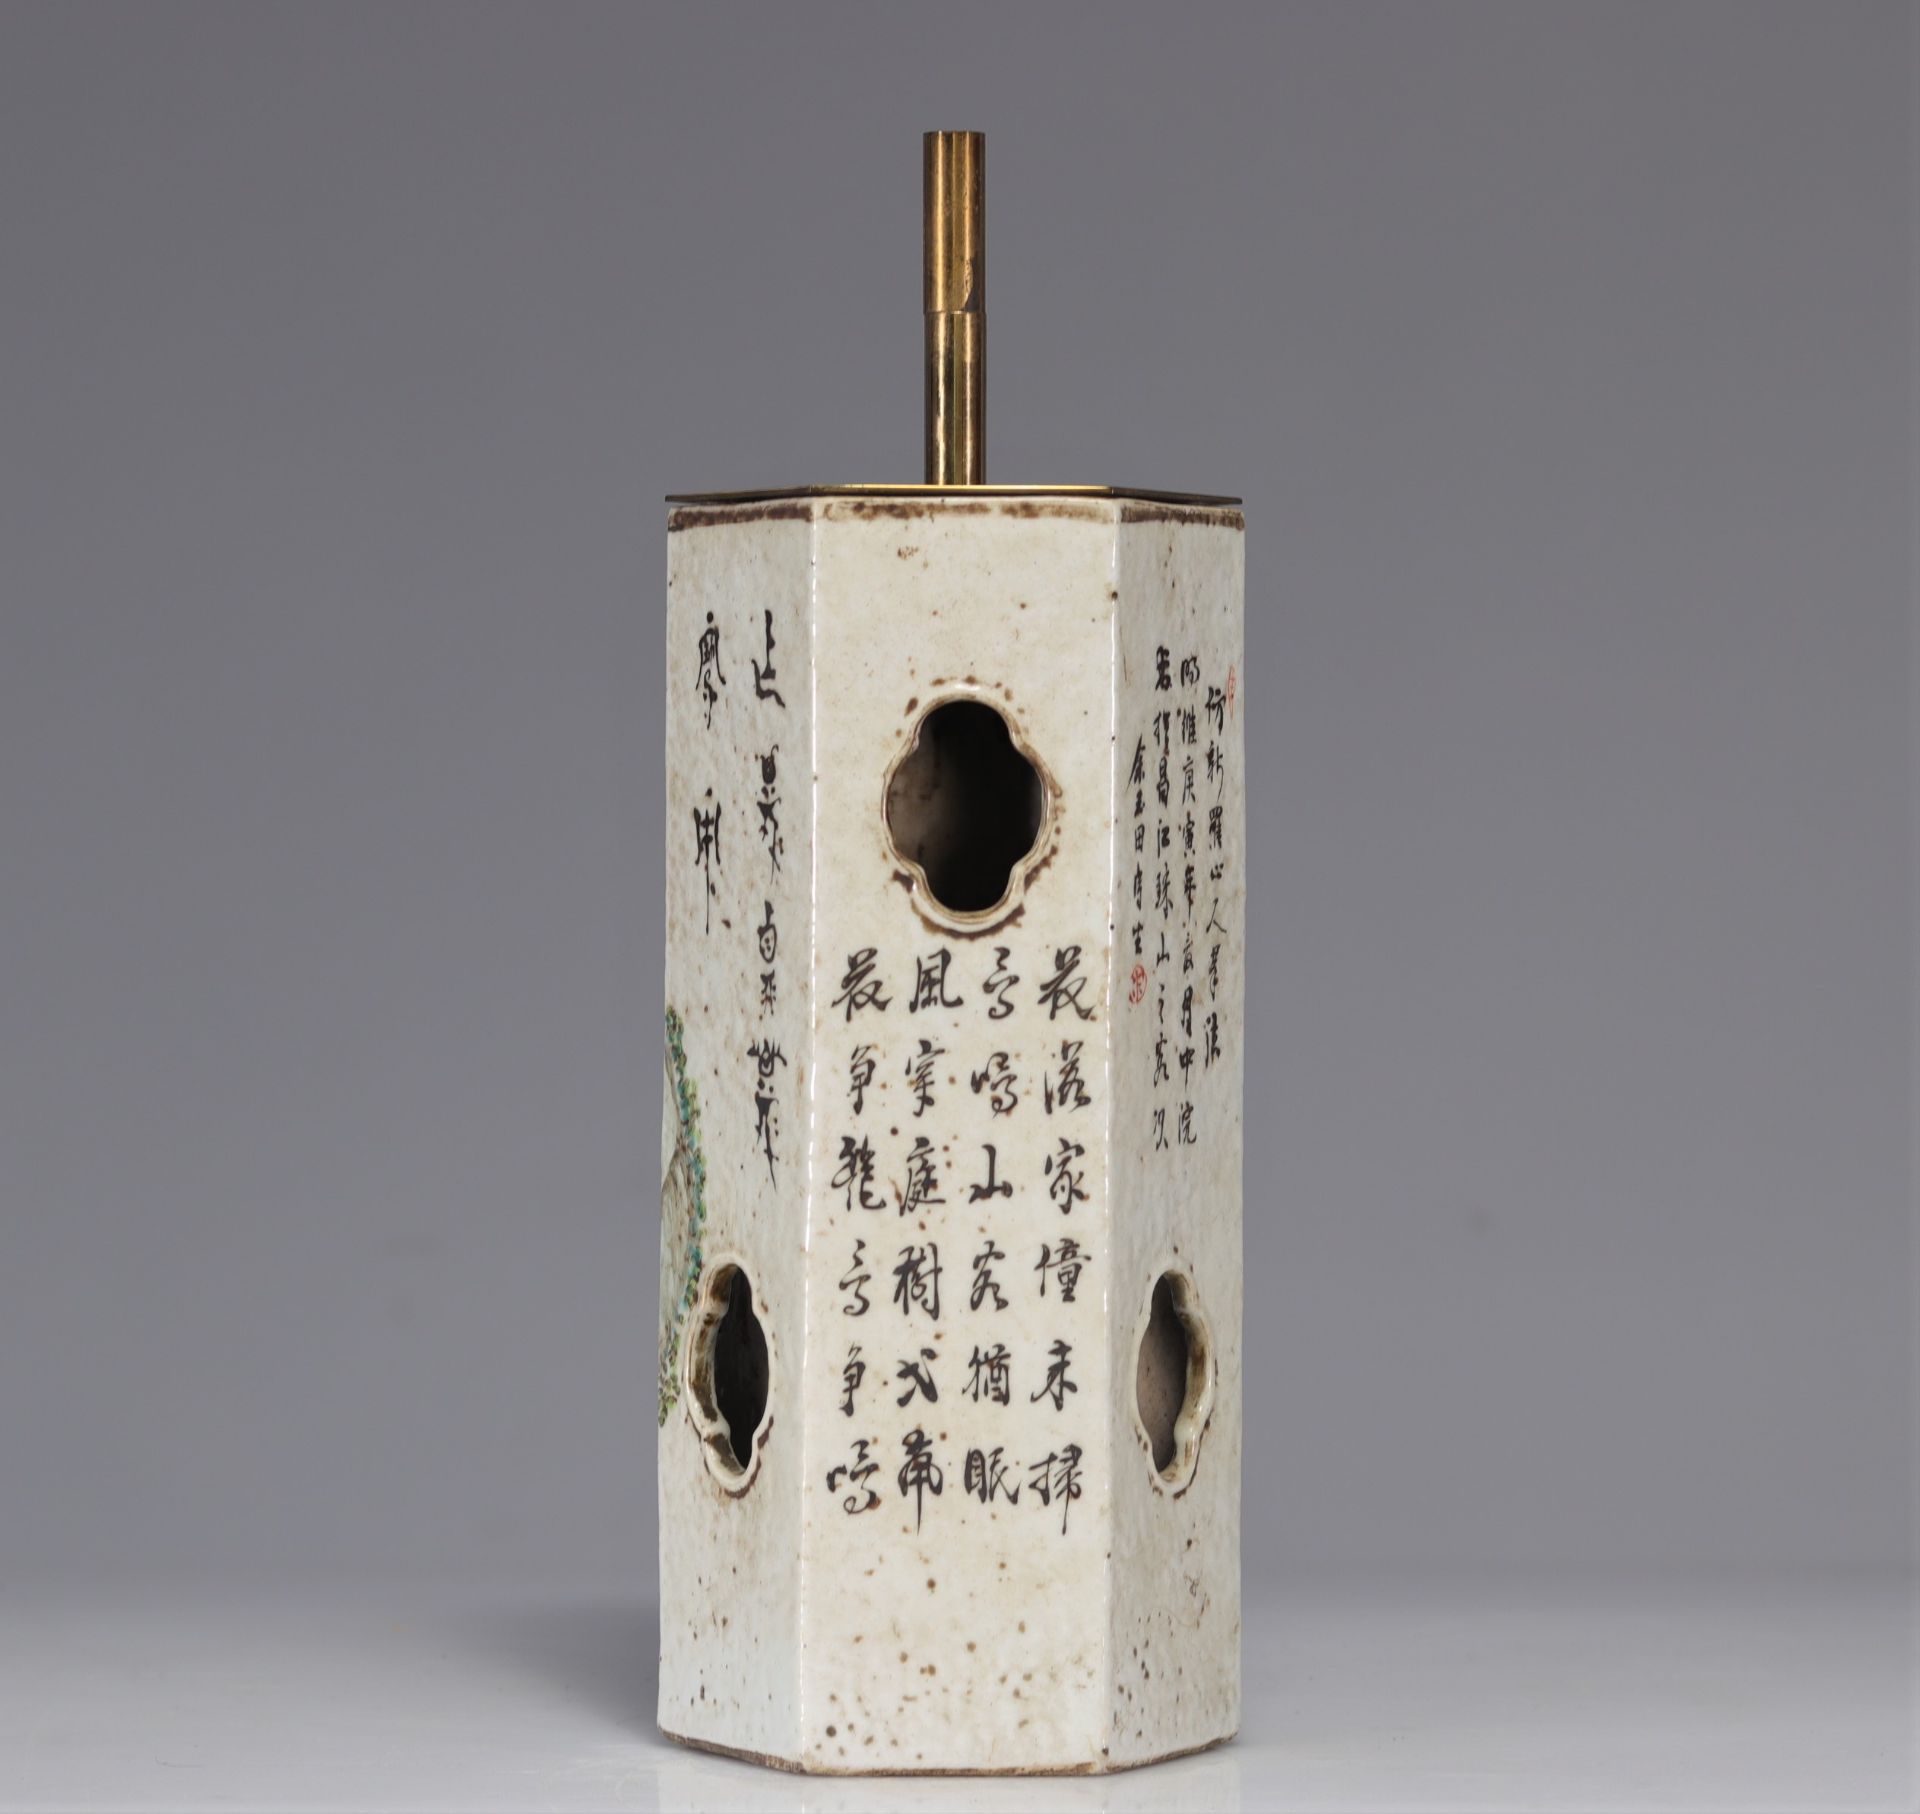 Qianjiang cai porcelain vase decorated with birds - Image 2 of 5